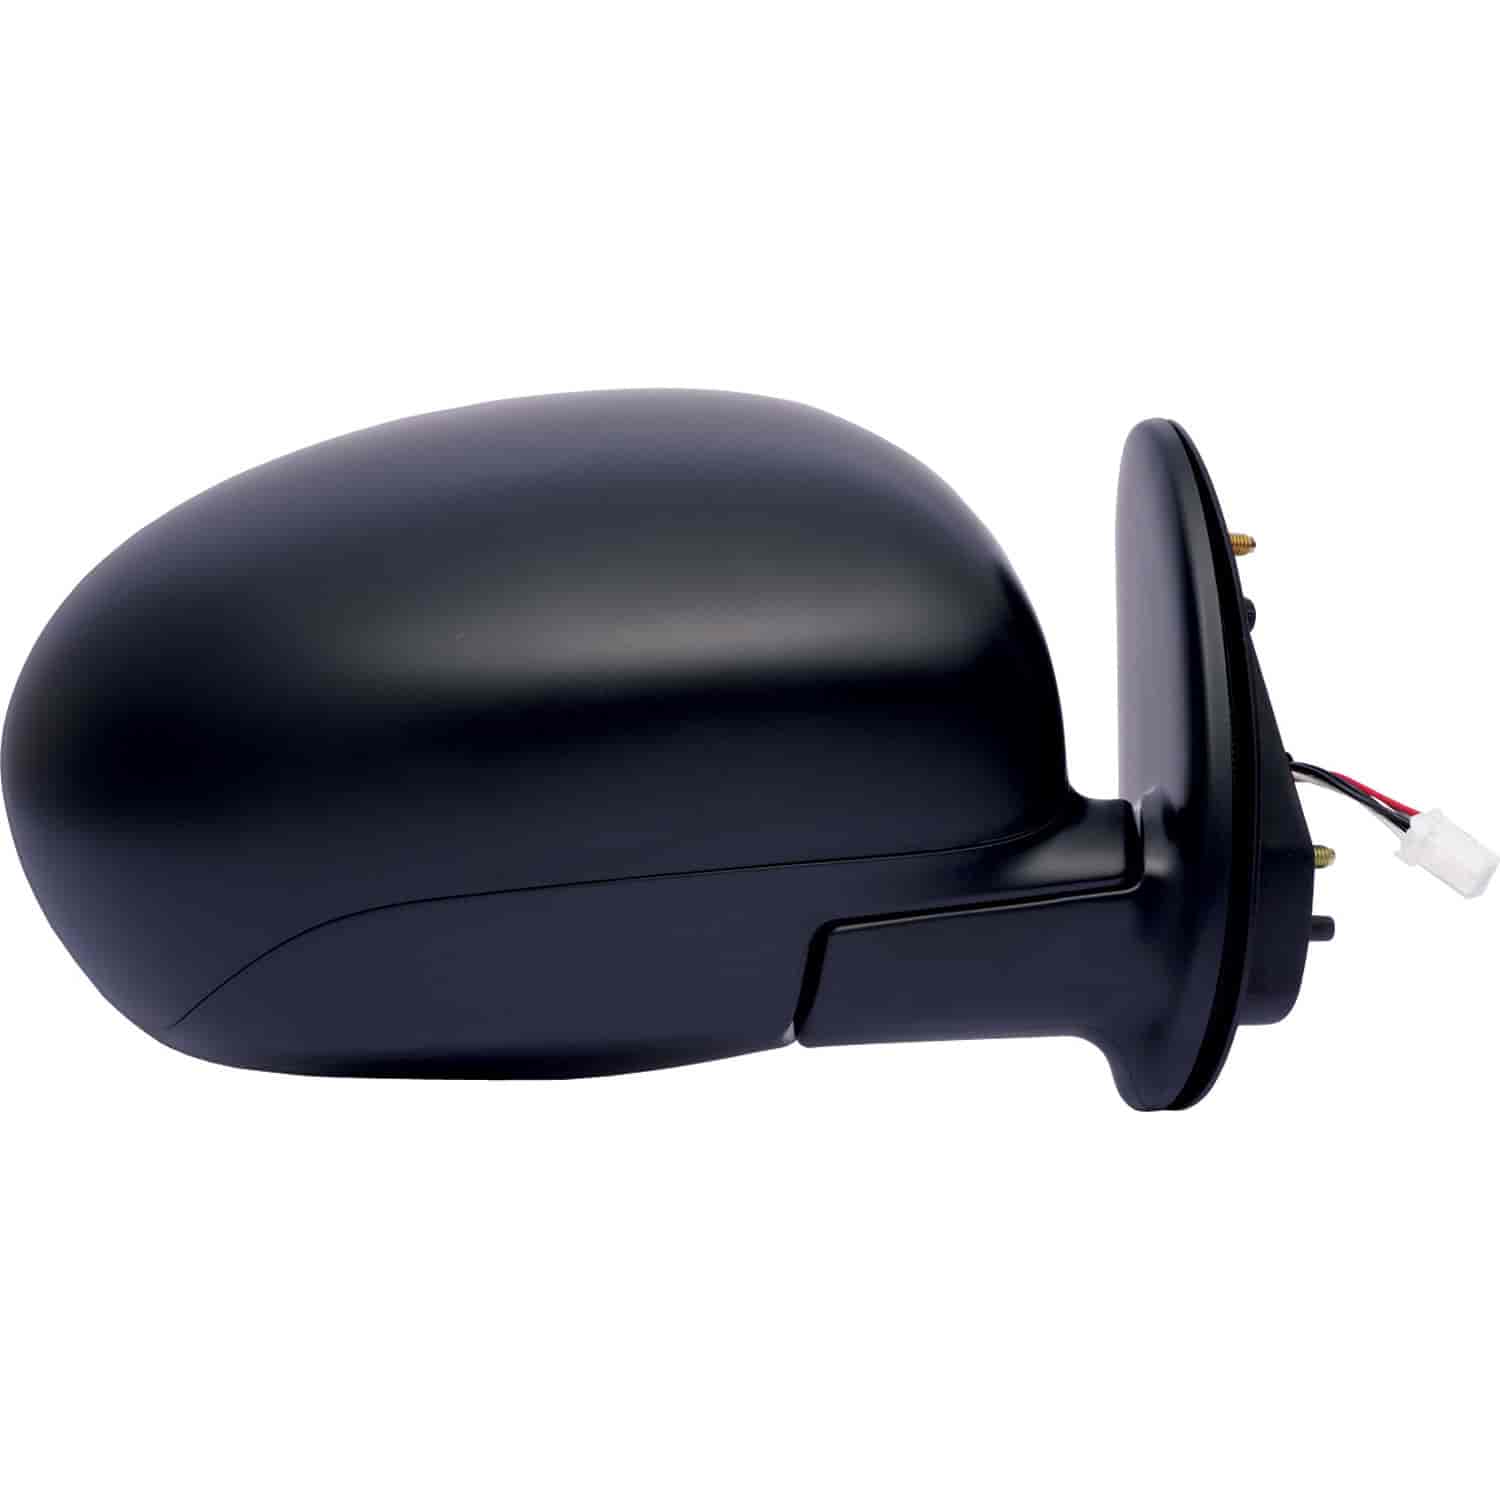 OEM Style Replacement mirror for 09-14 Nissan Cube passenger side mirror tested to fit and function